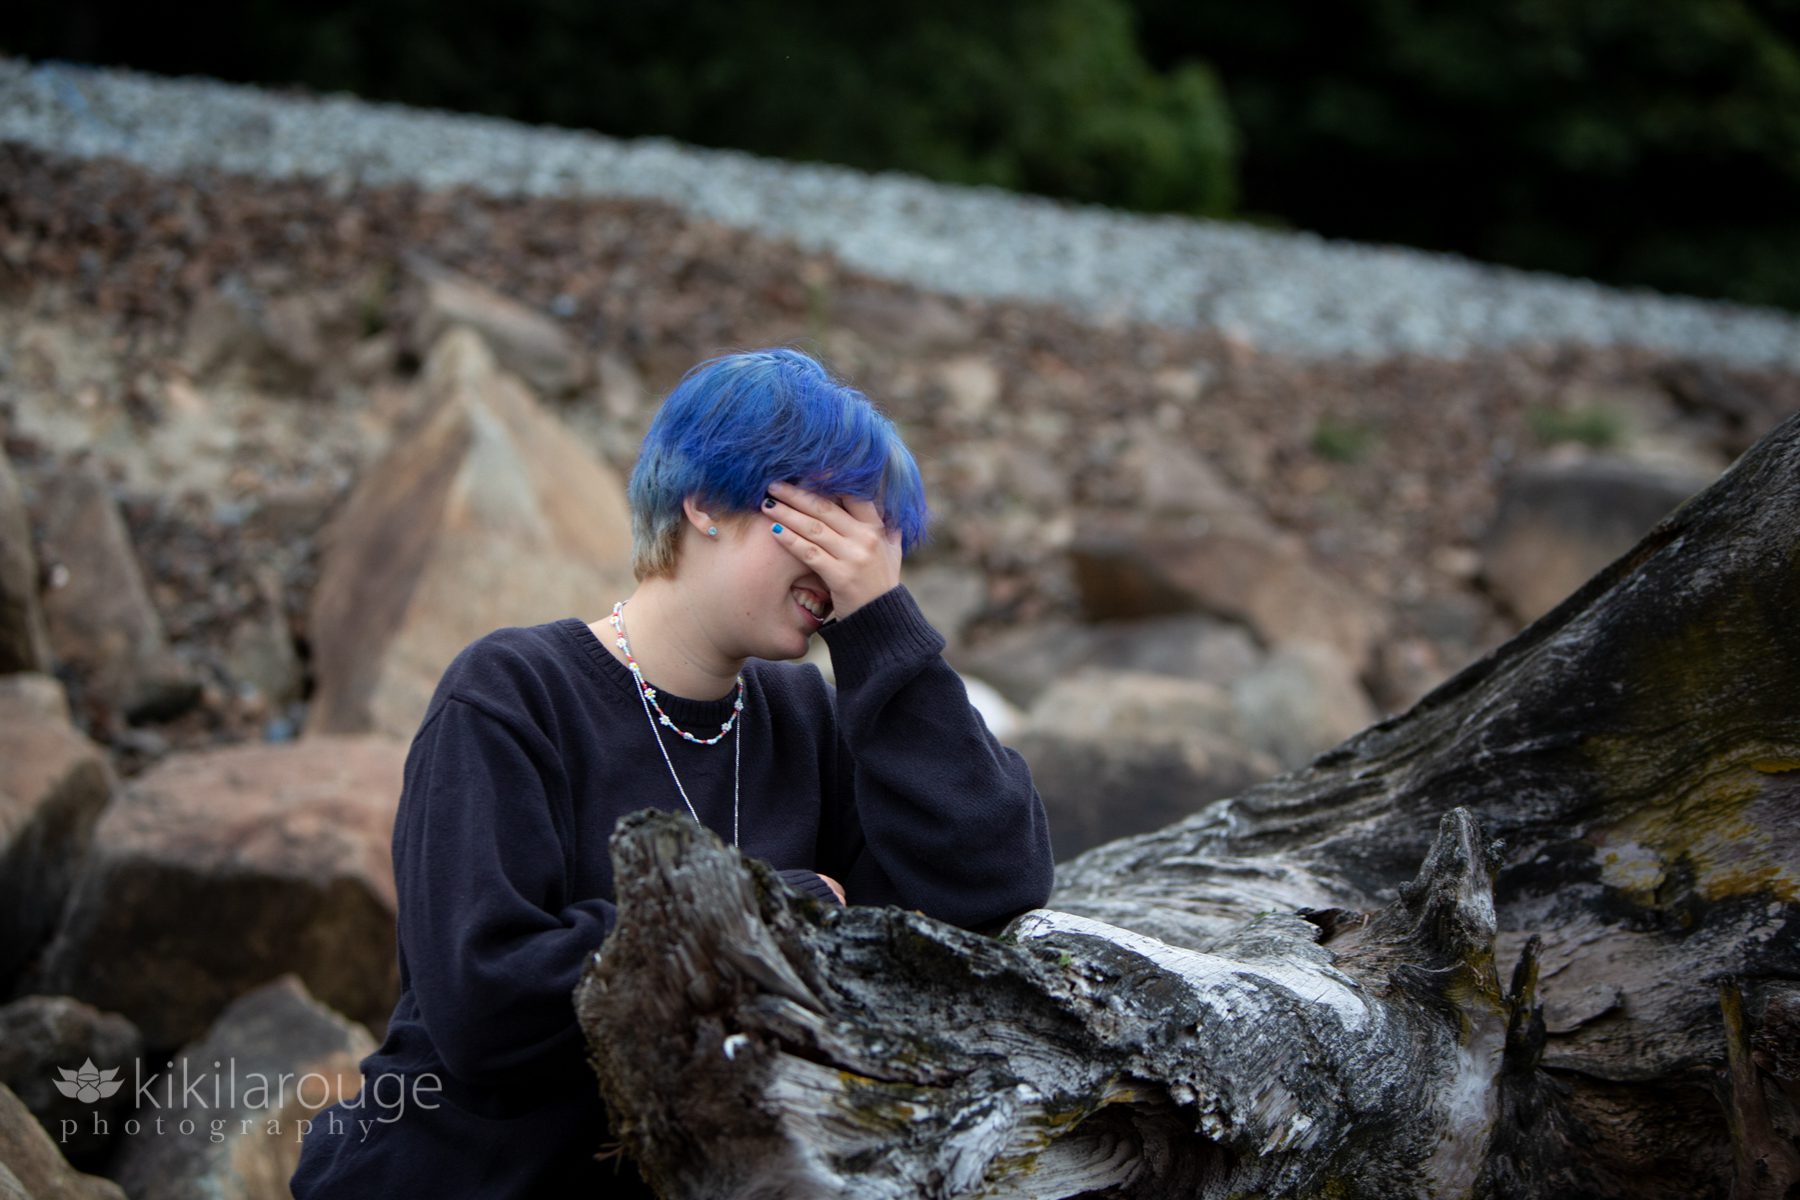 Teen with blue hair laughing into her hand leaning on large driftwood